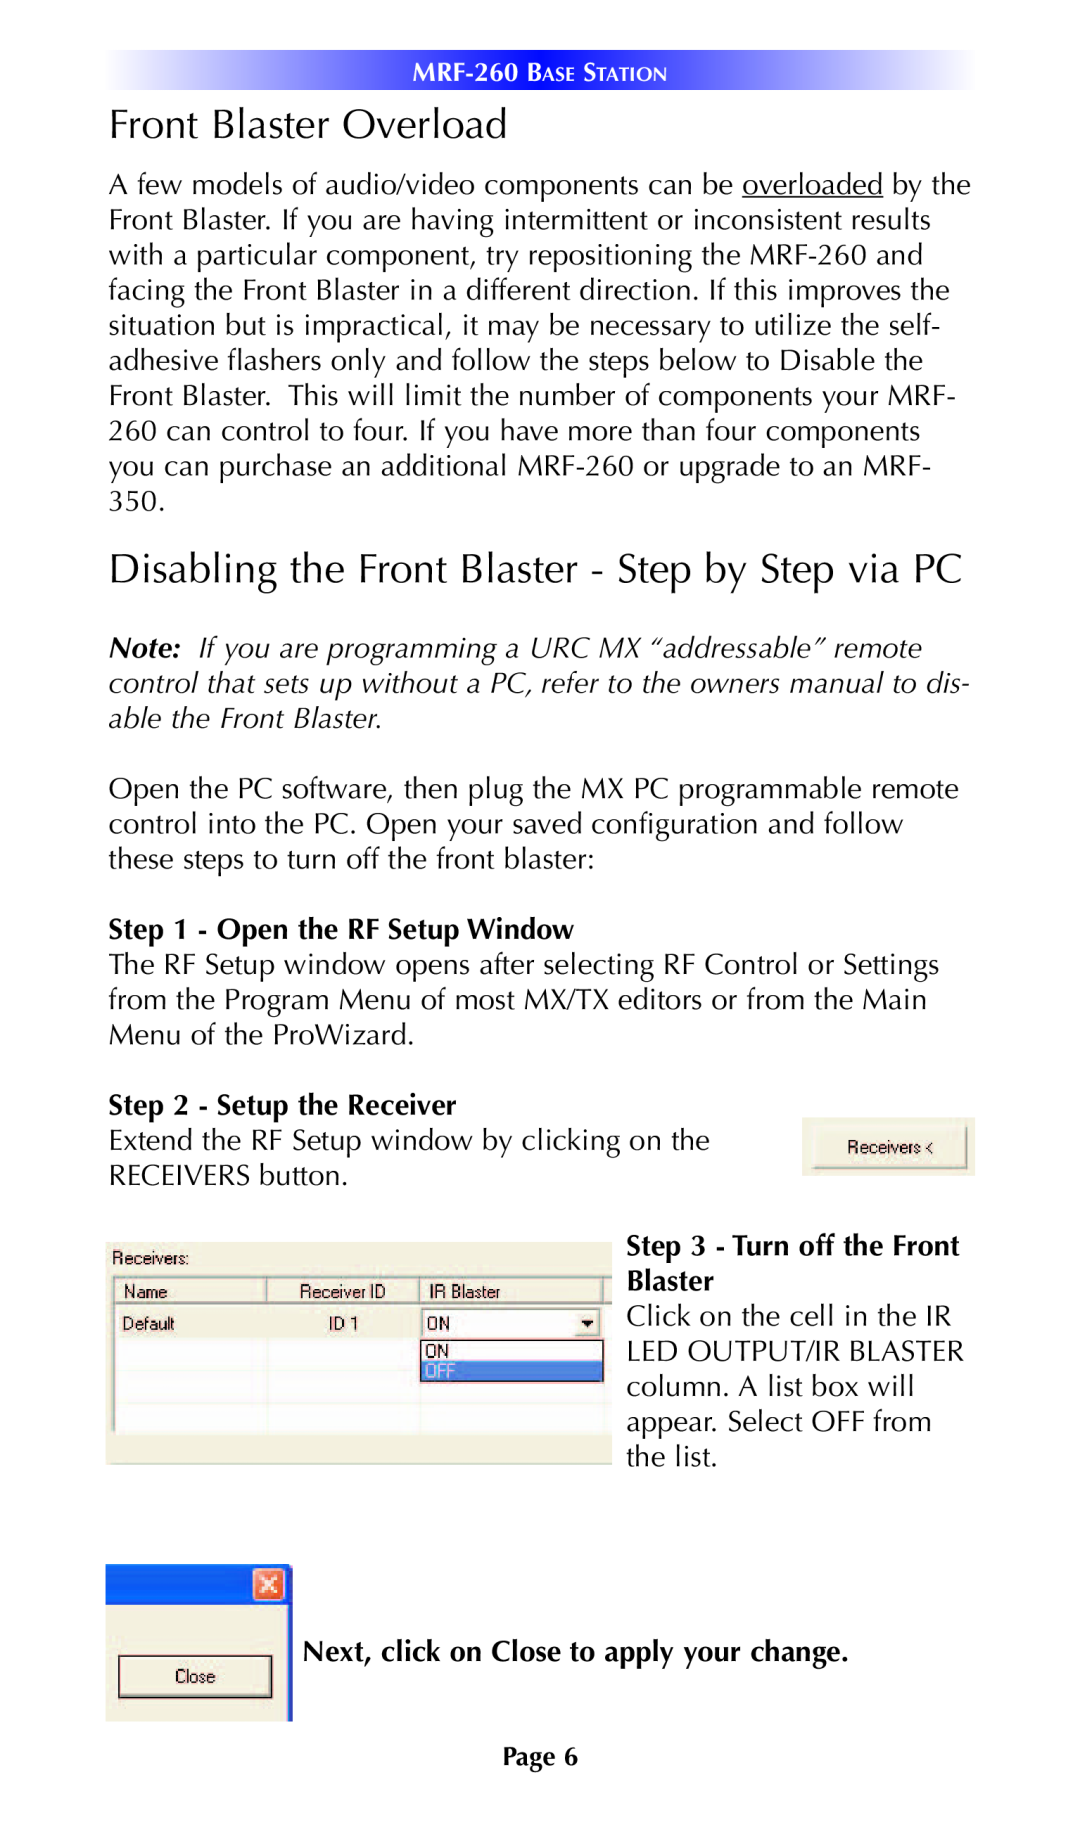 Universal Remote Control MRF-260 Front Blaster Overload, Disabling the Front Blaster - Step by Step via PC 